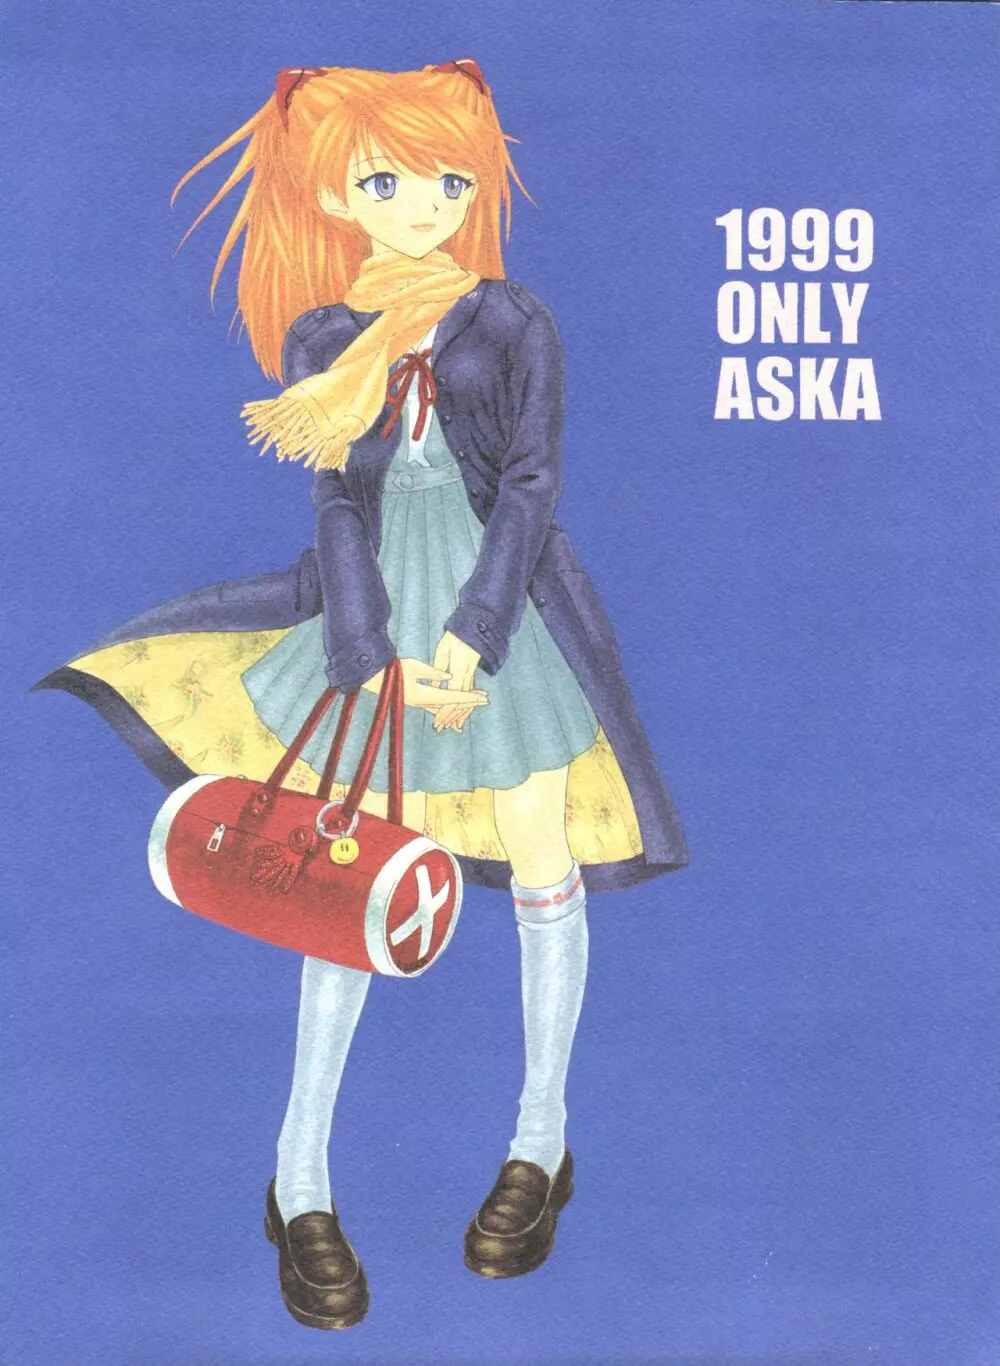 1999 ONLY ASKA - page1